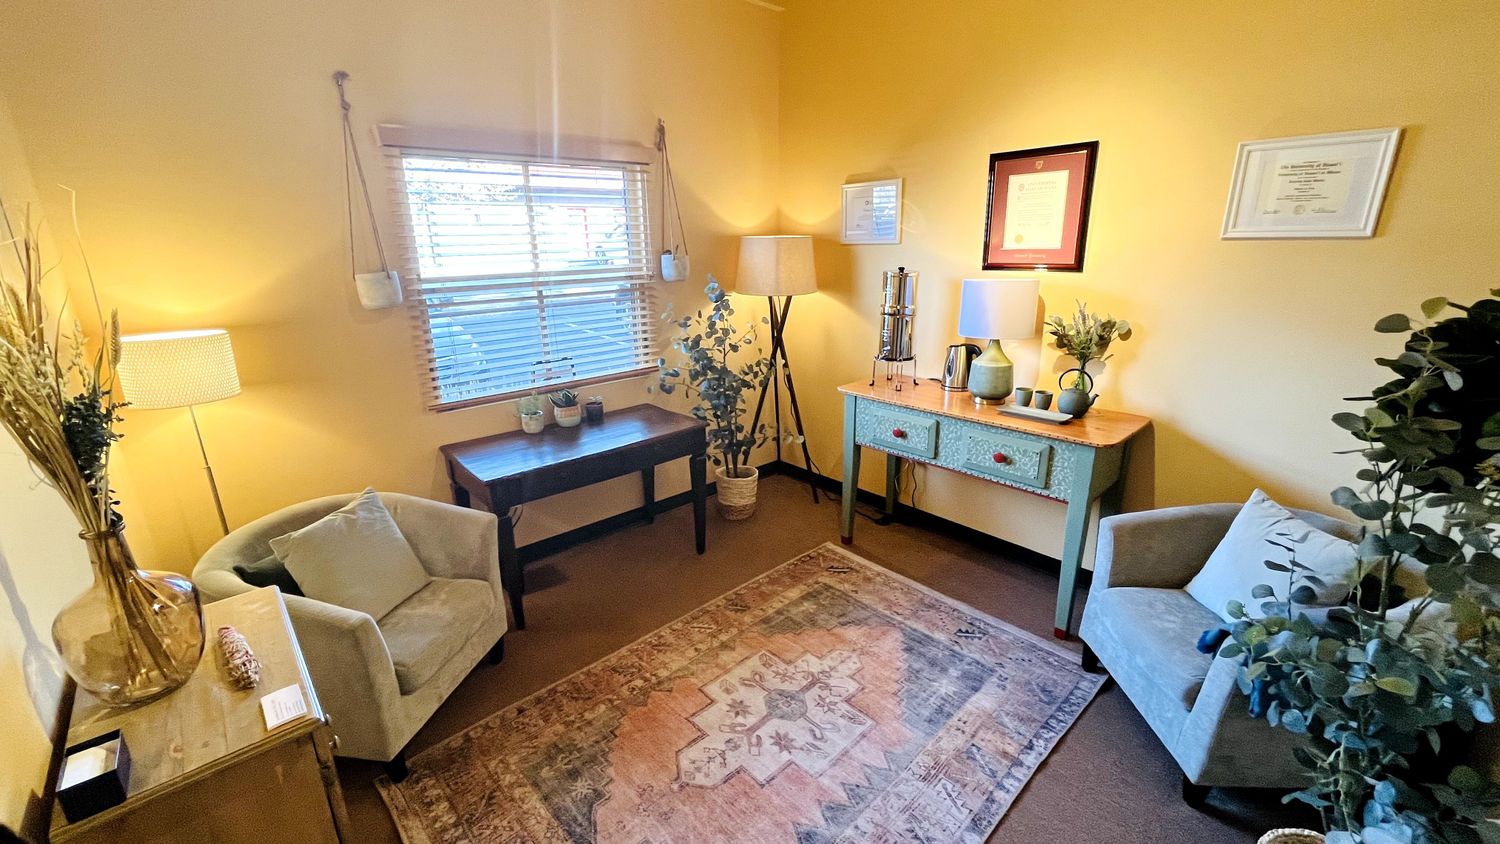 Gallery Photo of Main Therapy Office. Here, I meet with clients for individual, couples, and family therapy. I look forward to serving you tea!